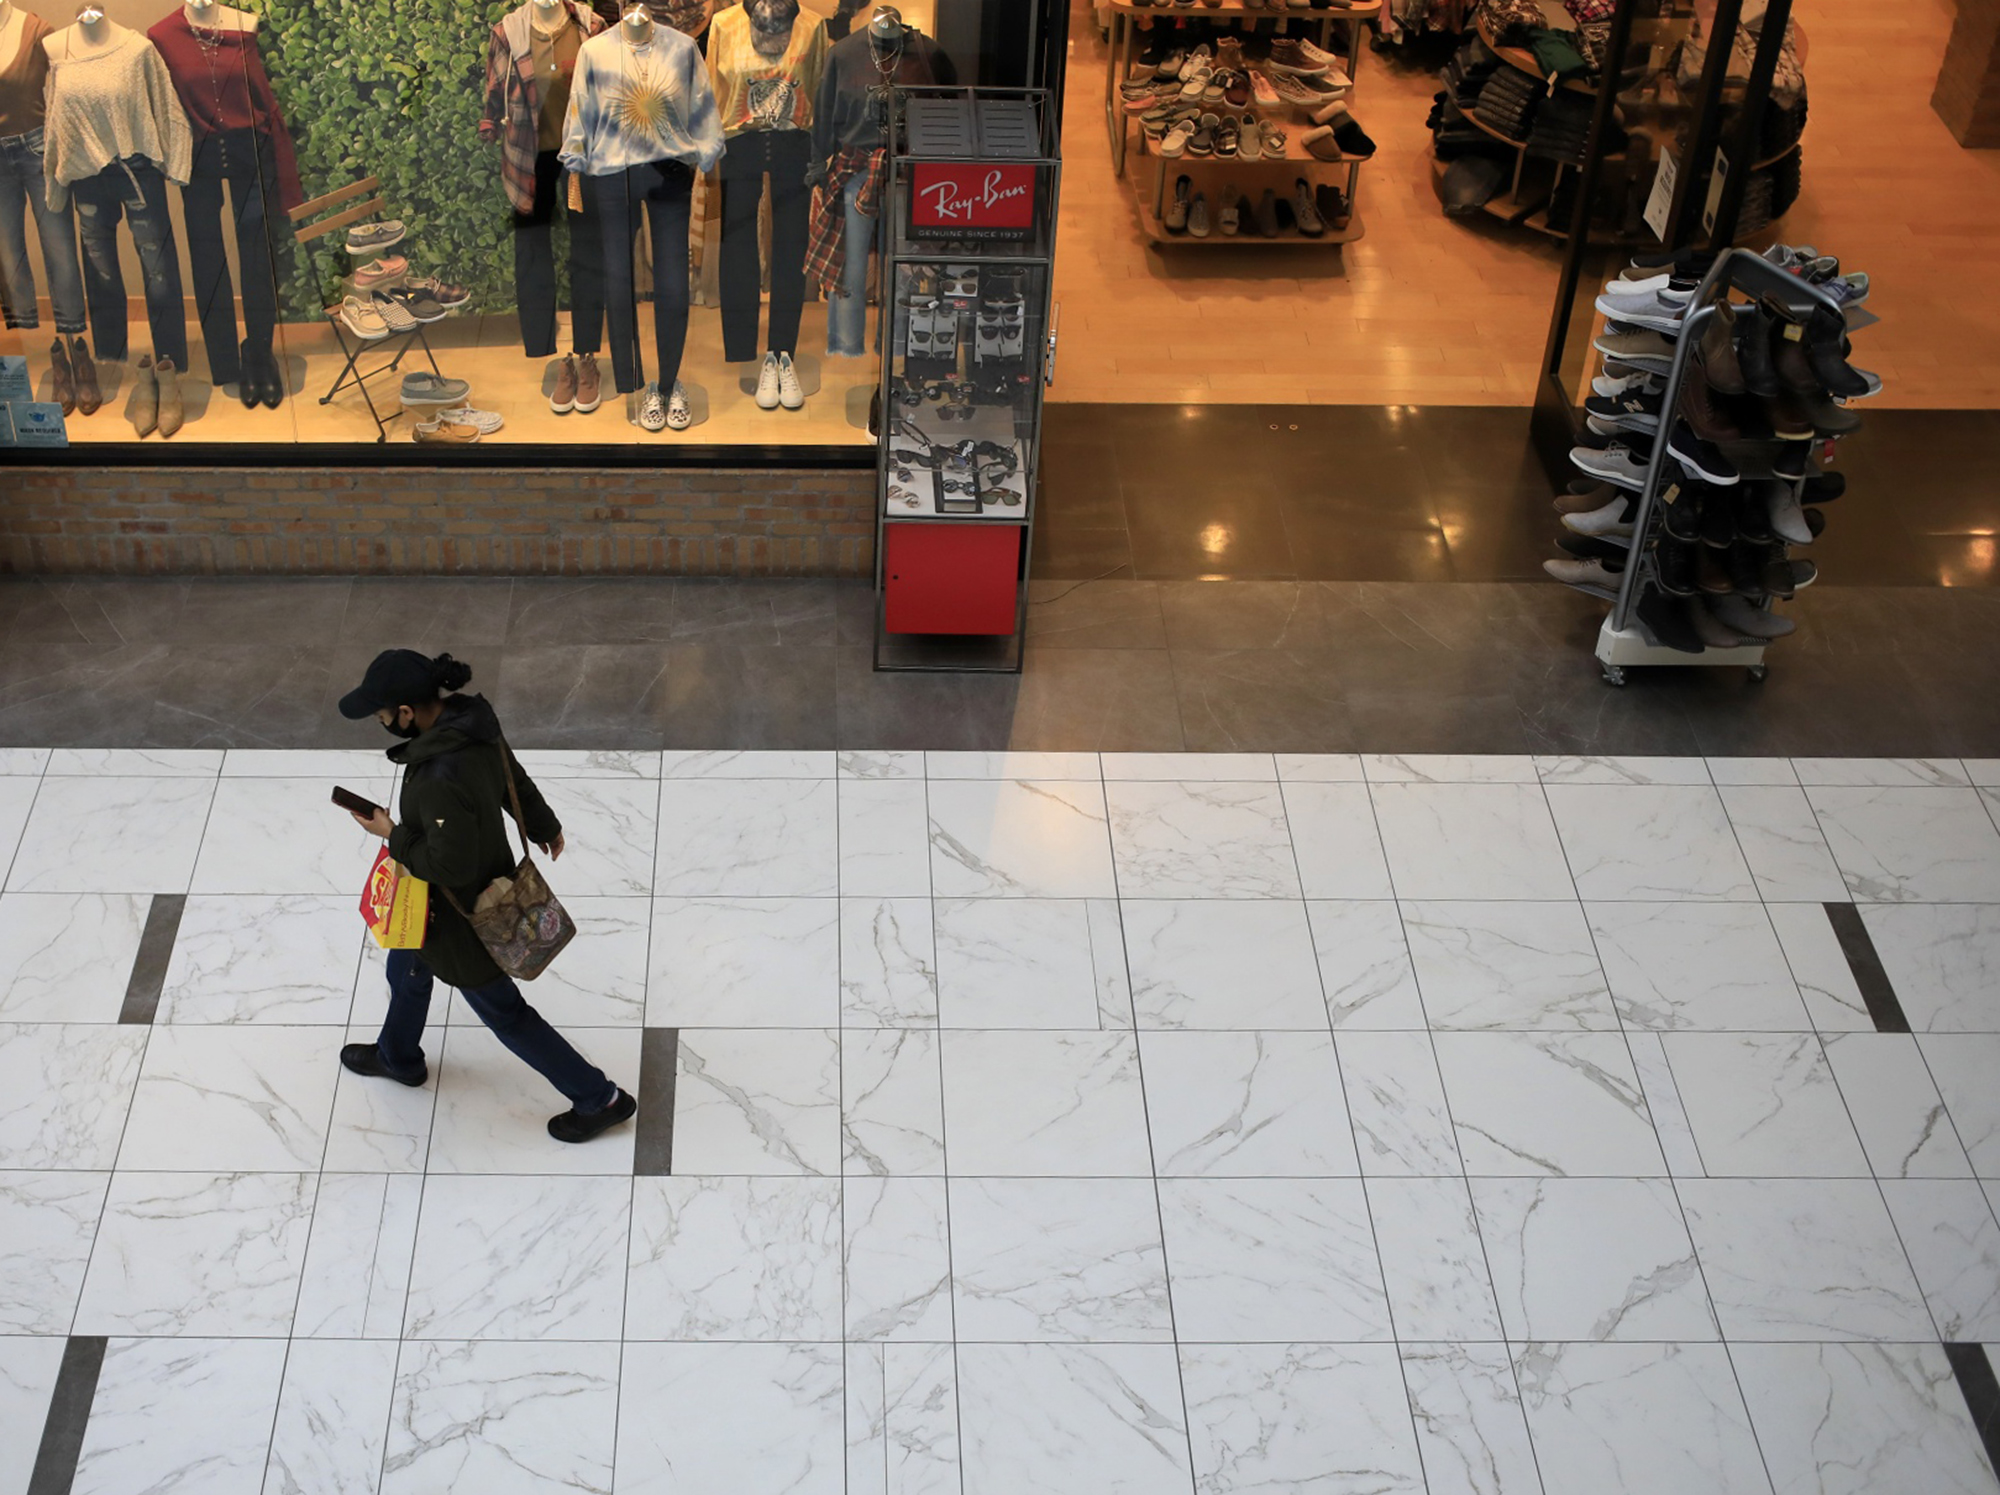 Mall Values Plunge 60% After Reappraisals Triggered by Bad Debt - Bloomberg